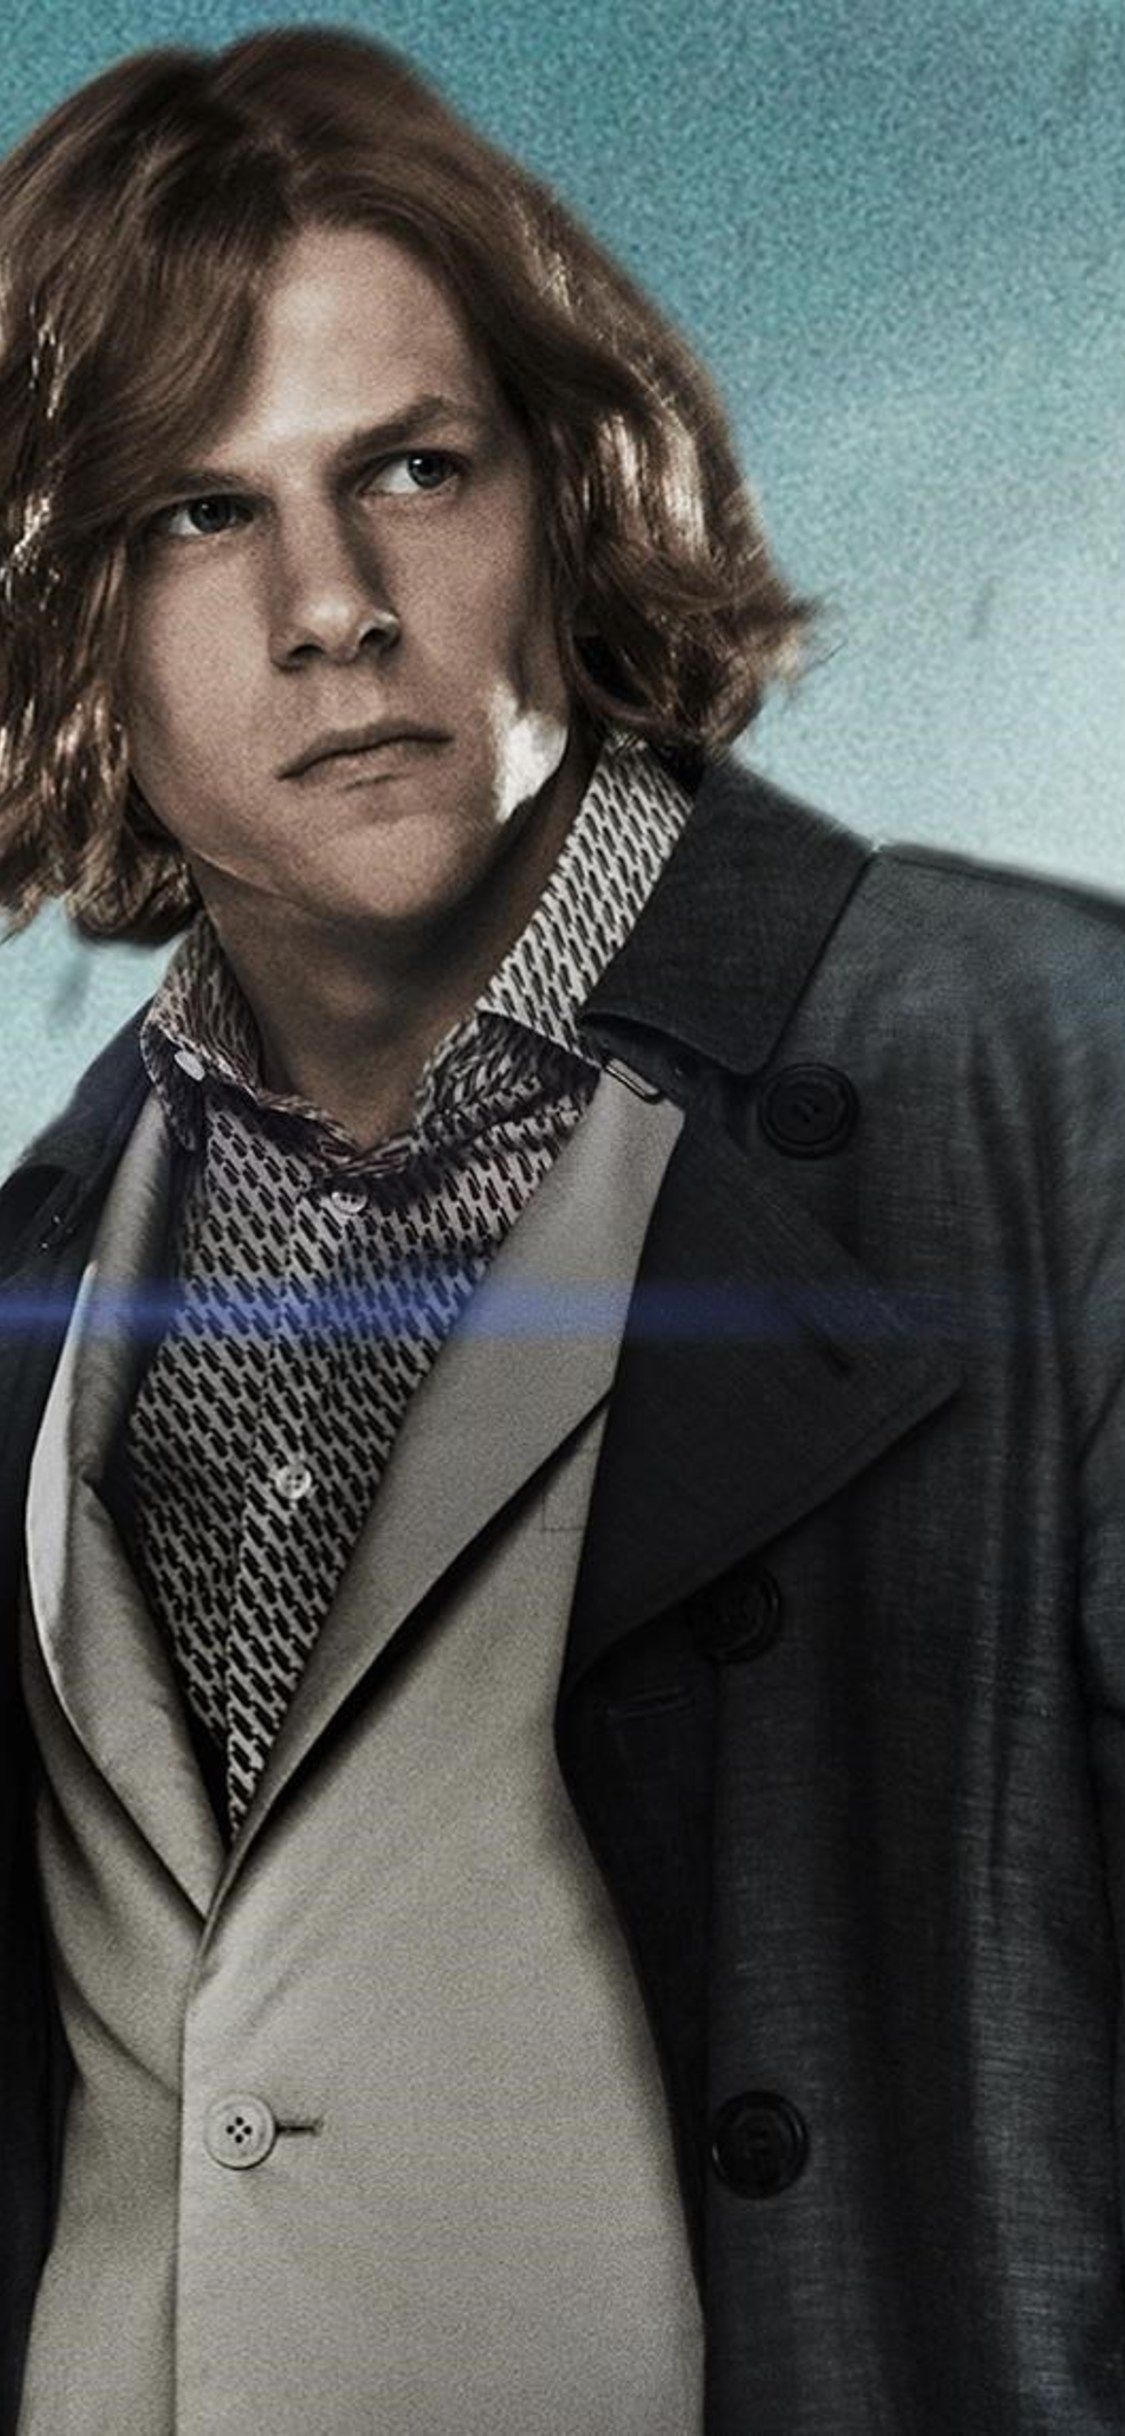 Lex Luthor: An eccentric young businessman who is obsessed with defeating Superman. 1130x2440 HD Background.